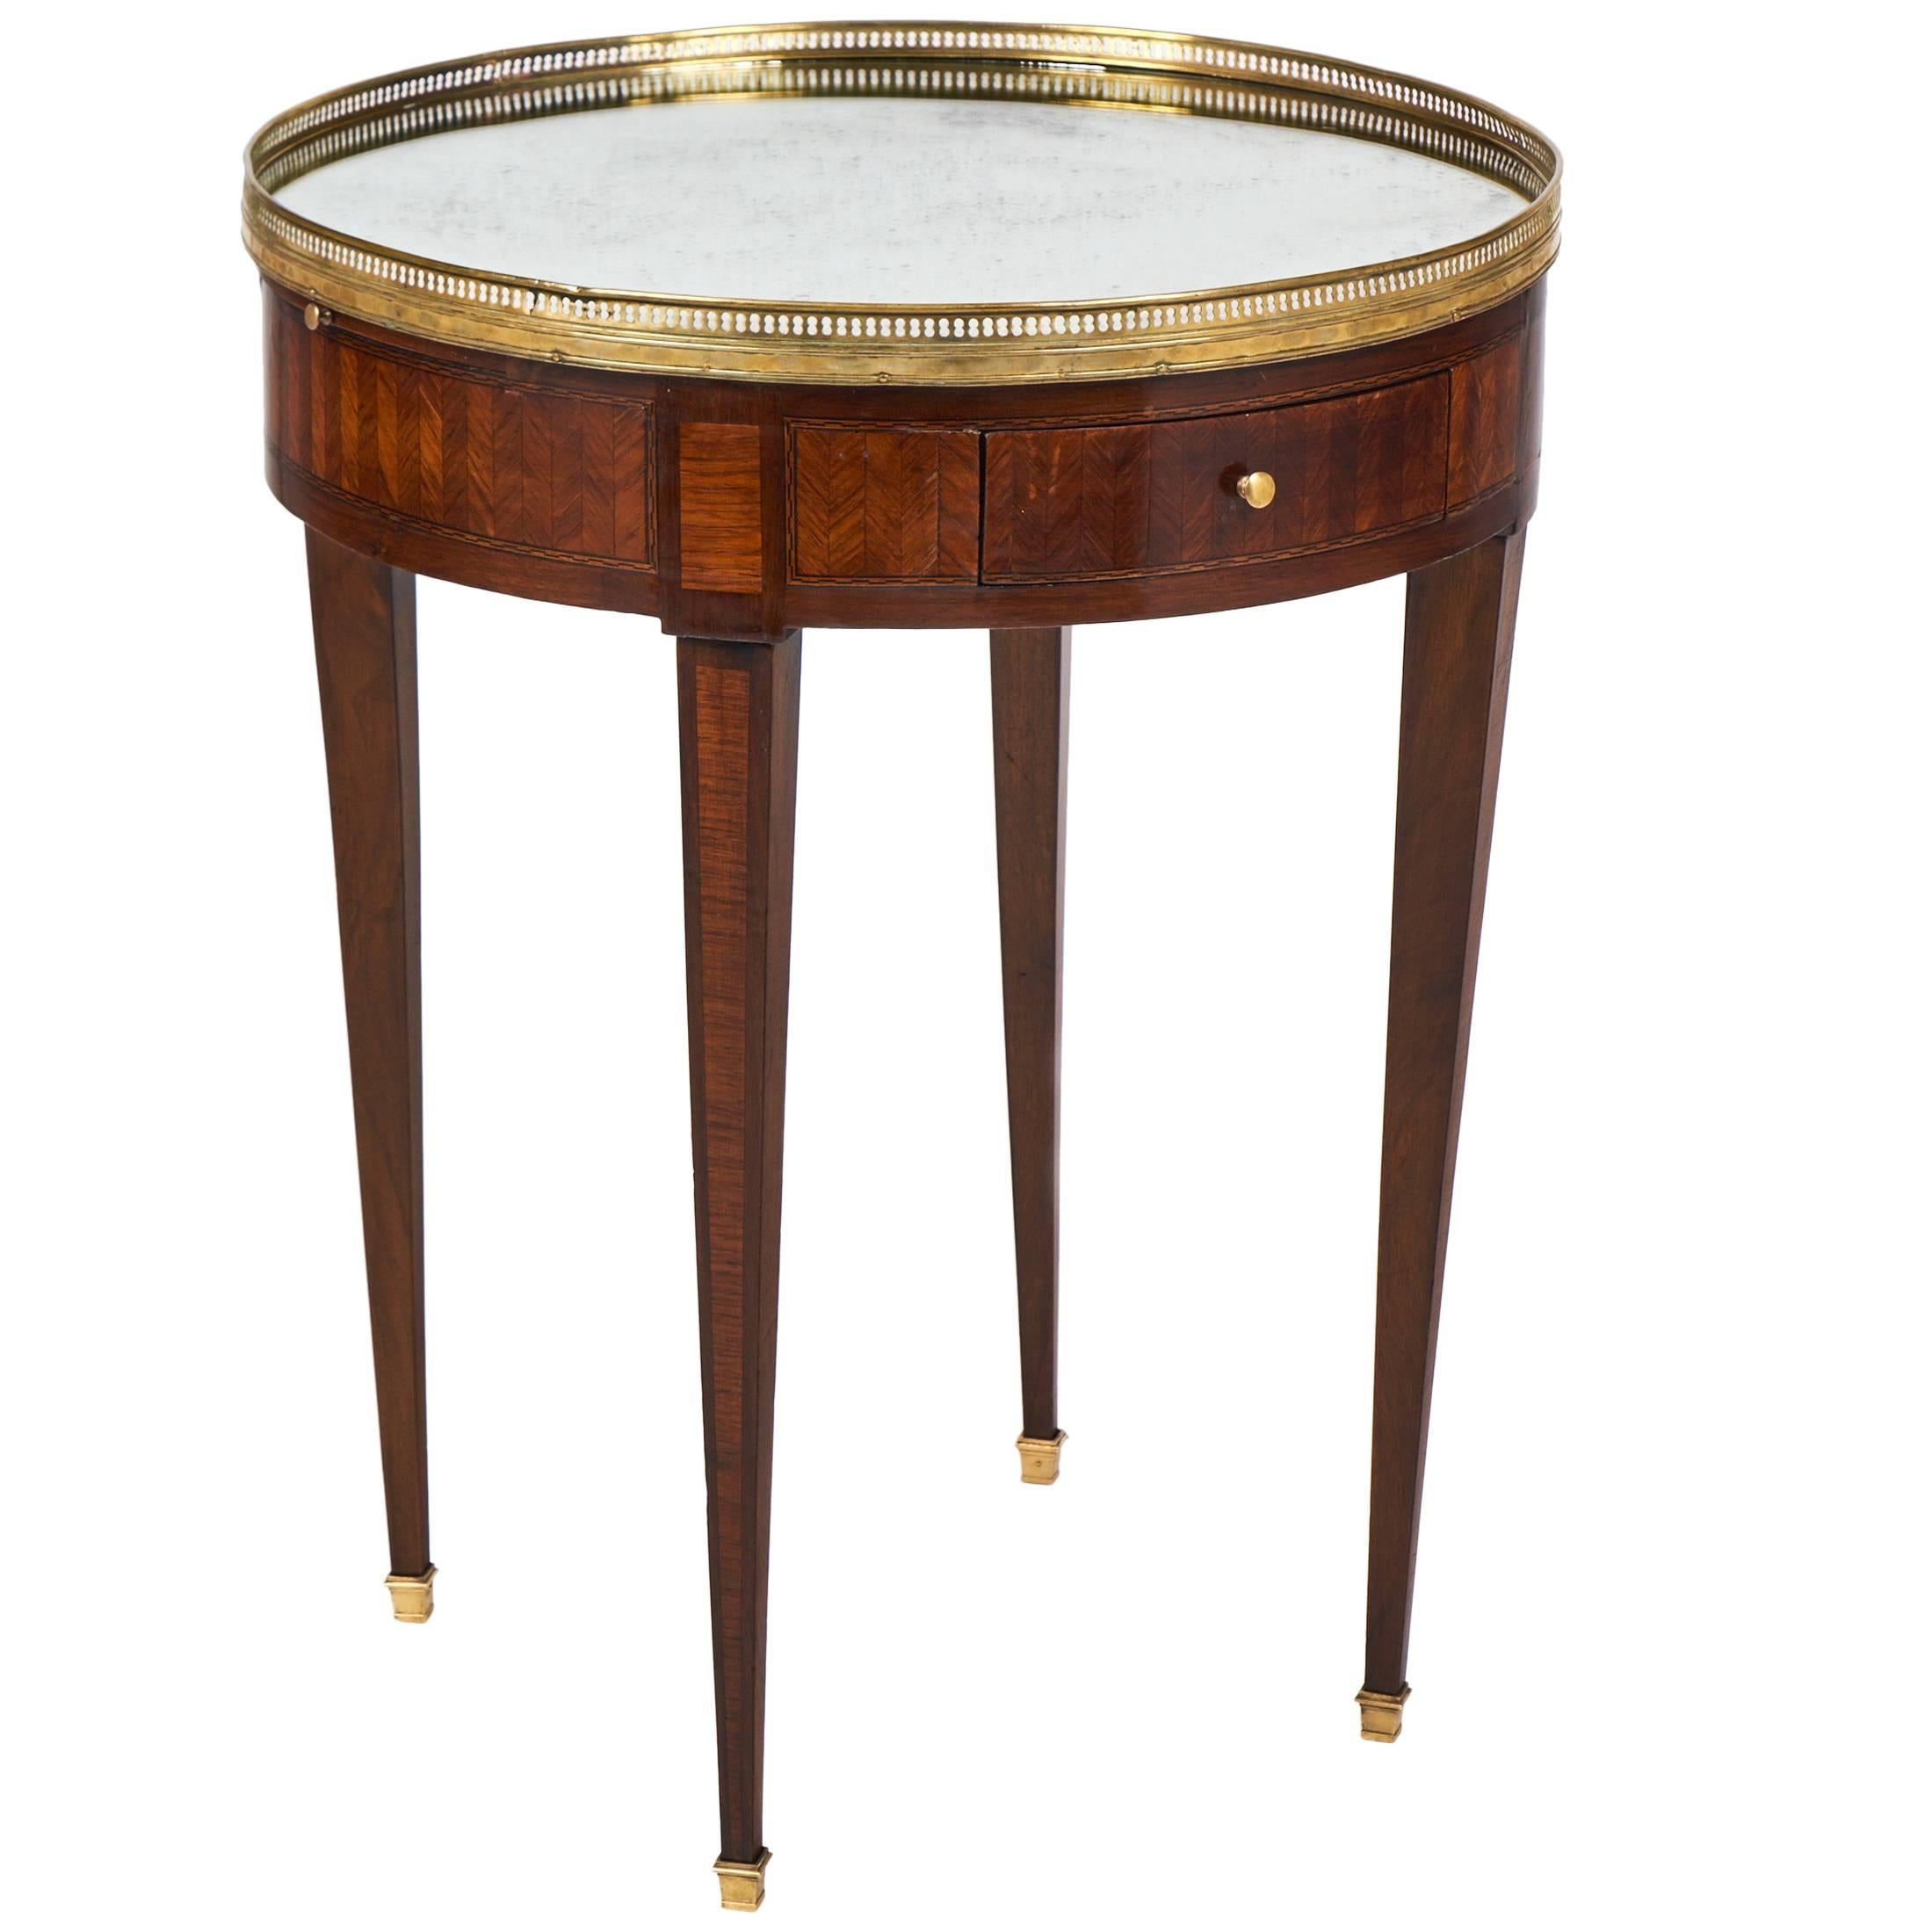 French Louis XVI Mirror-Top Marqueted Bouillotte Table